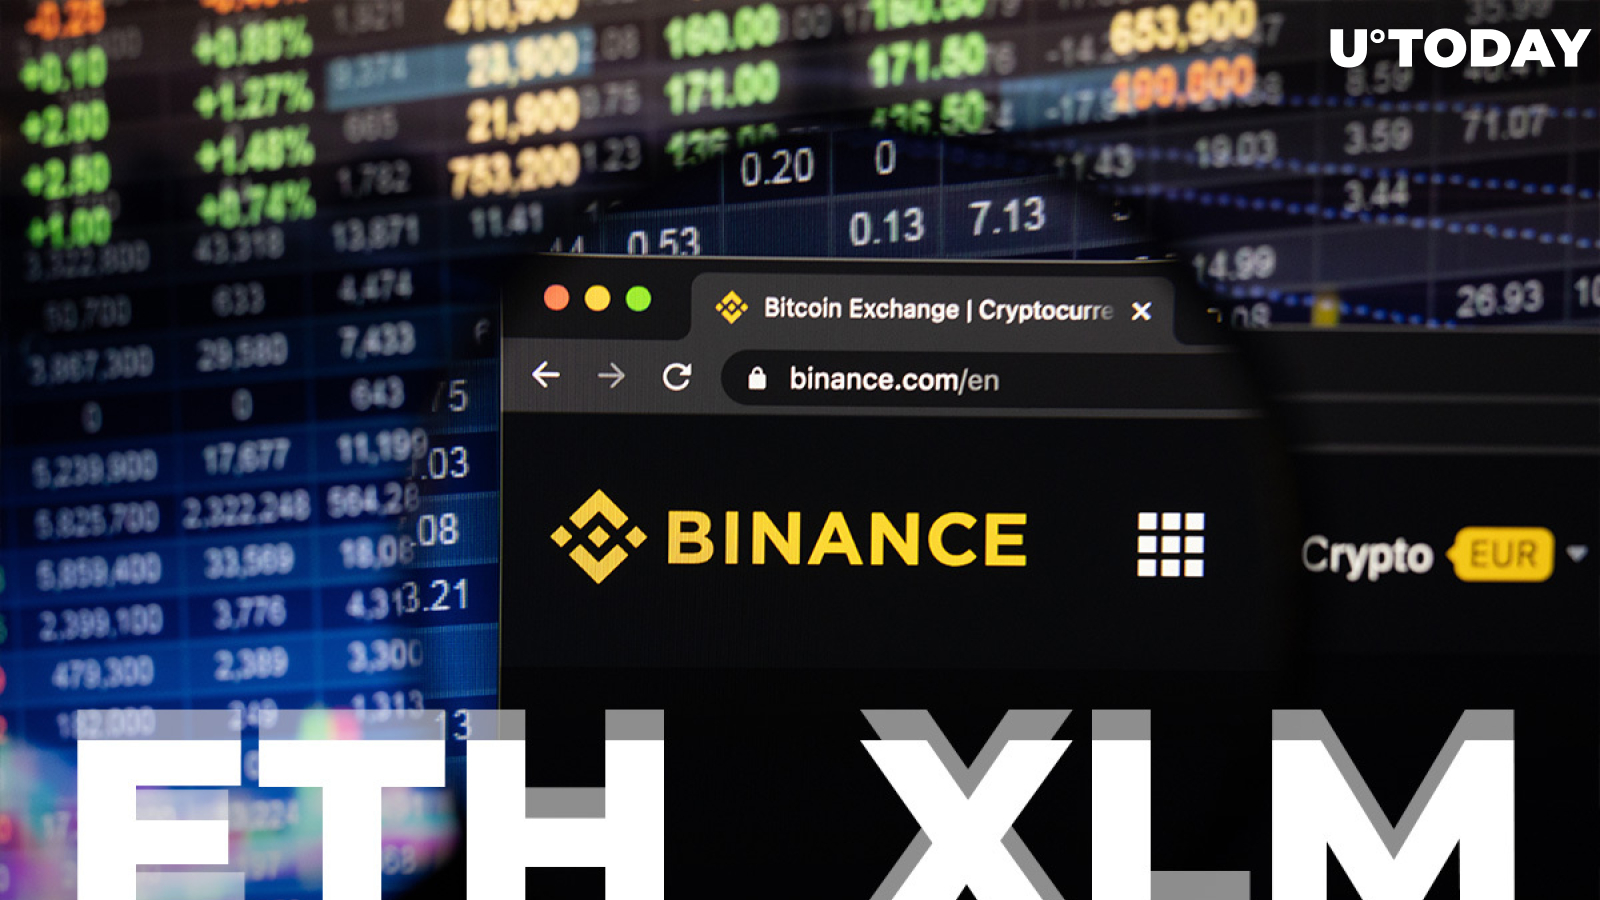 Binance Suspends ETH, XLM Withdrawals as XLM Surges to Highest Level Since 2018